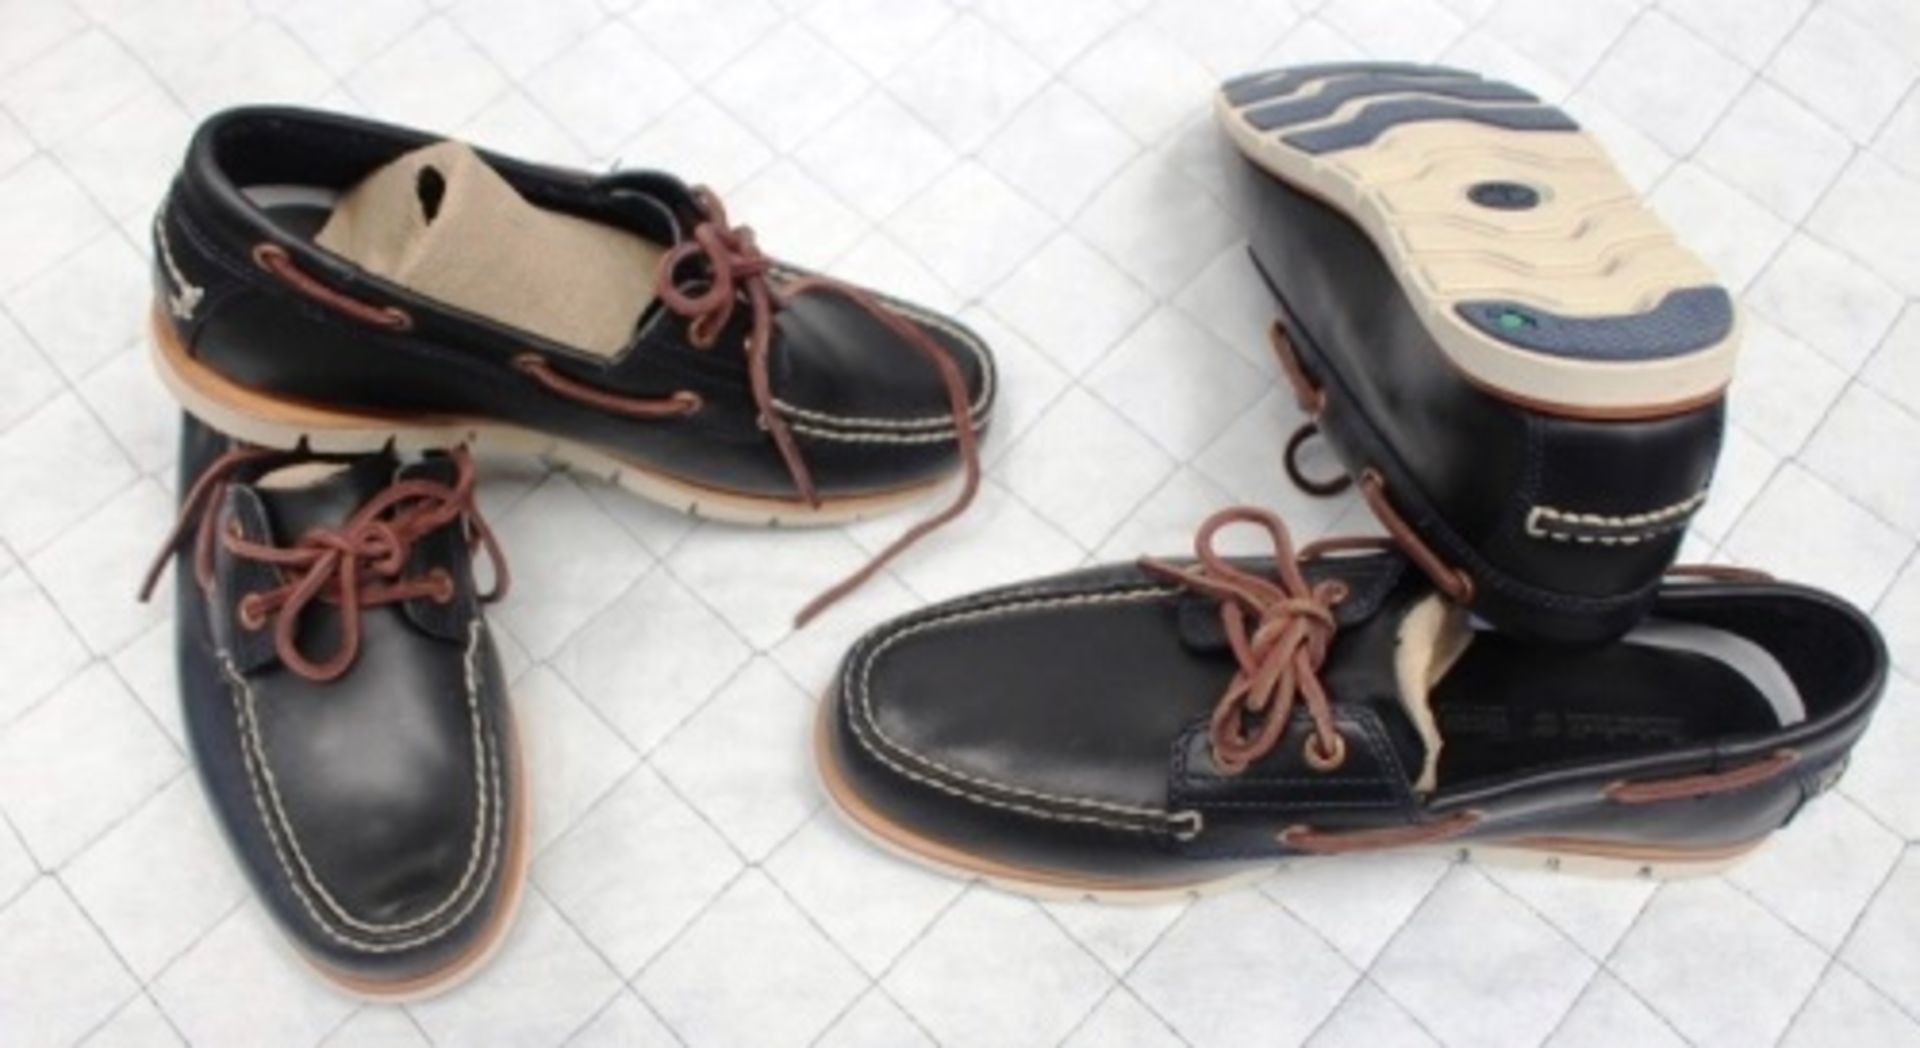 2 x pairs of Timberland men's black boat shoes, size 11 and 7, 1 x pair of Timberland Goretex men'